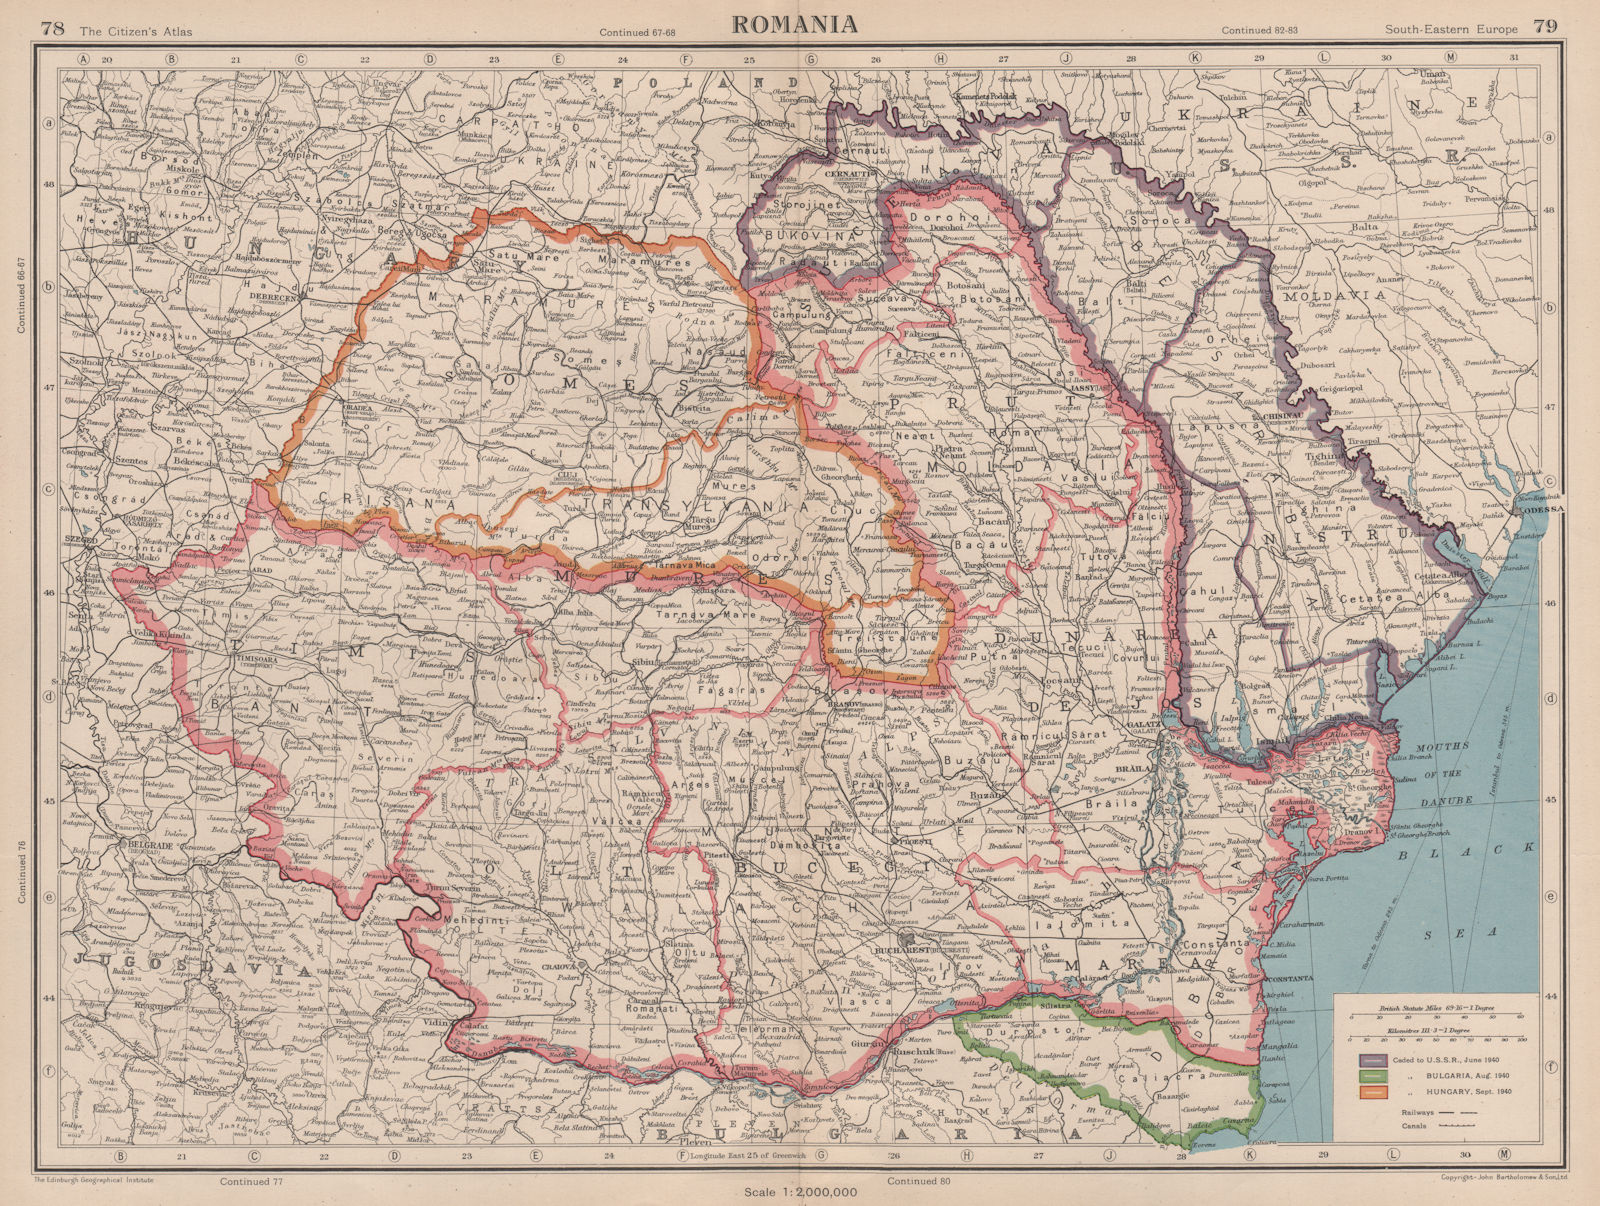 ROMANIA showing land ceded to USSR, Bulgaria & Hungary in 1940 1944 old map